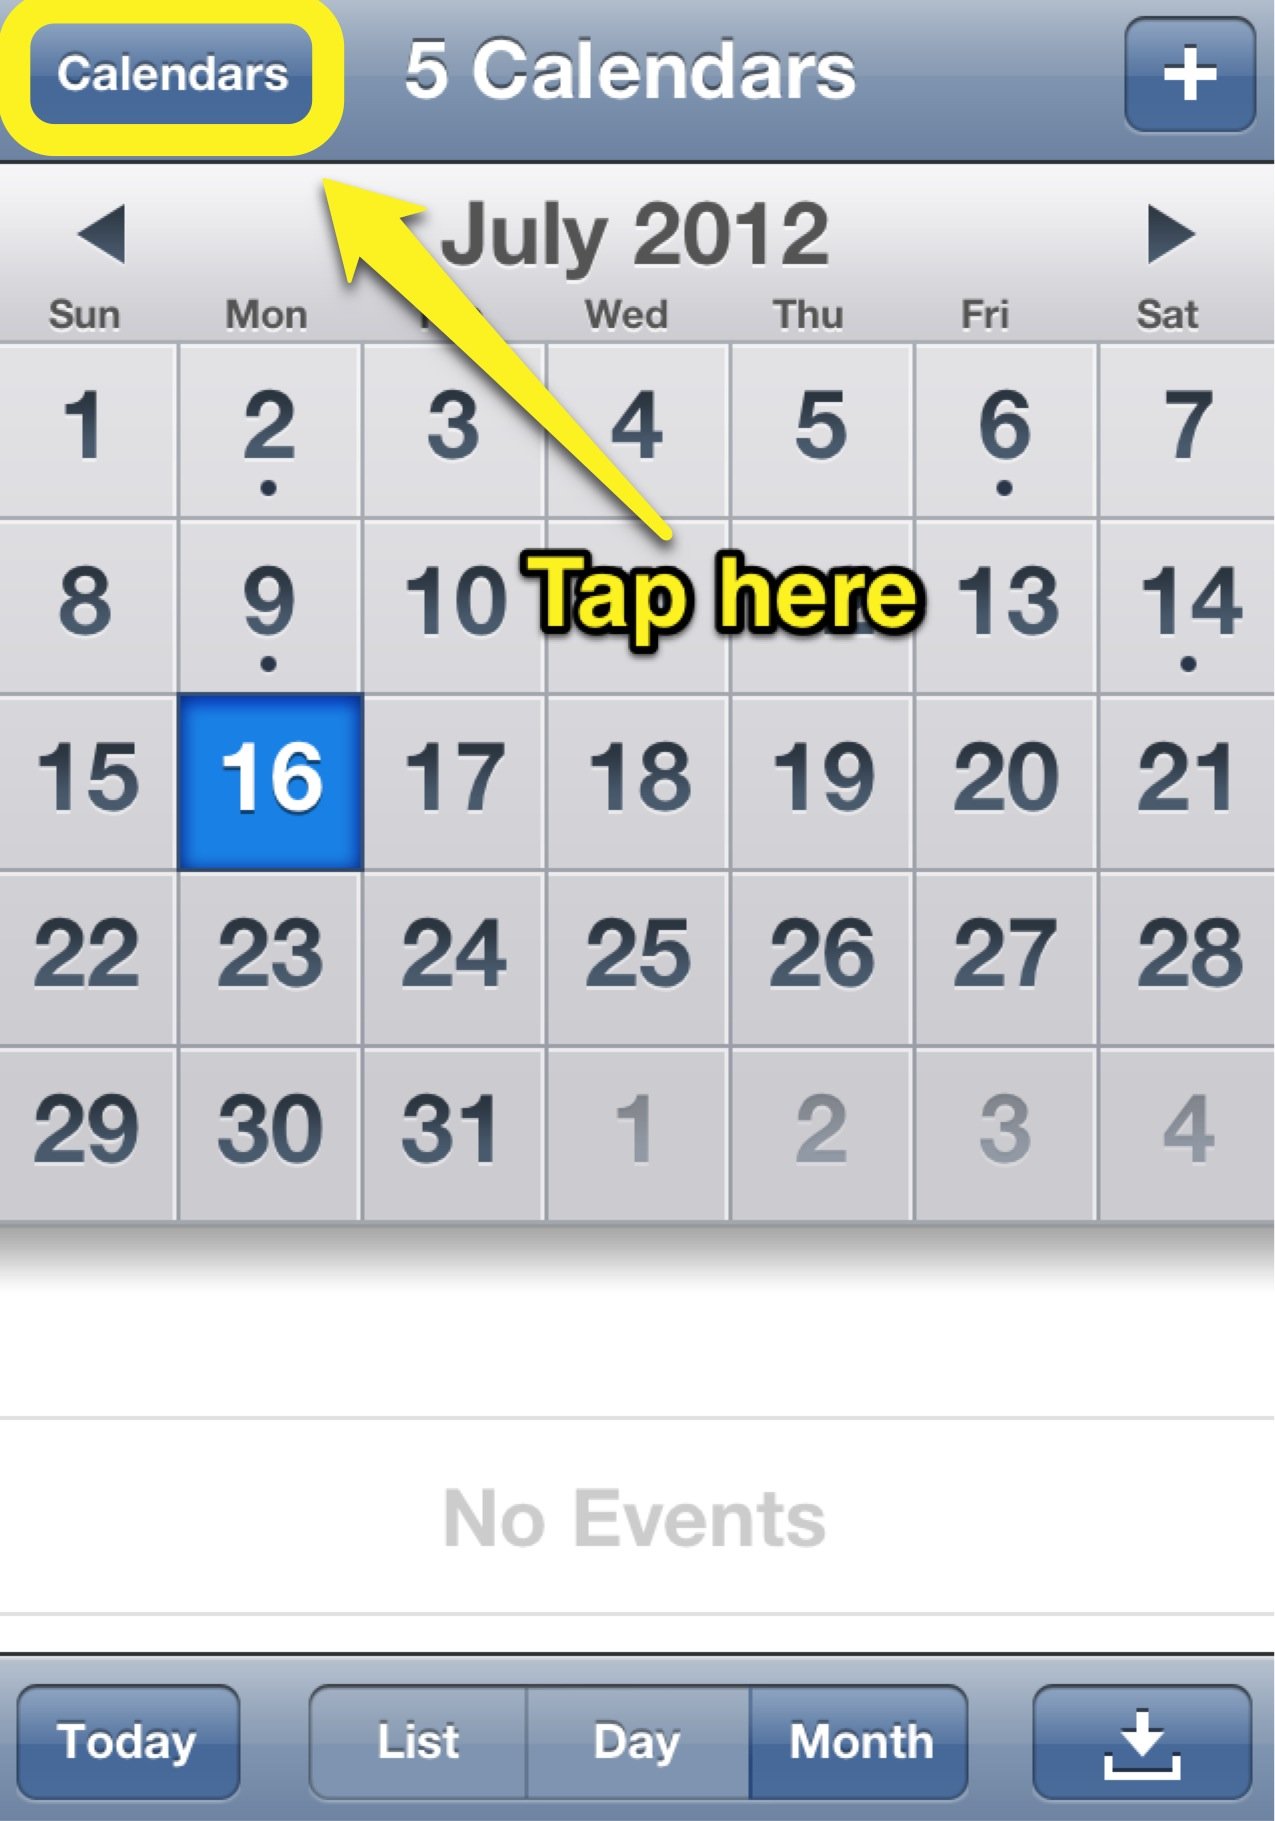 How to Sync Google Calendar to the iPhone